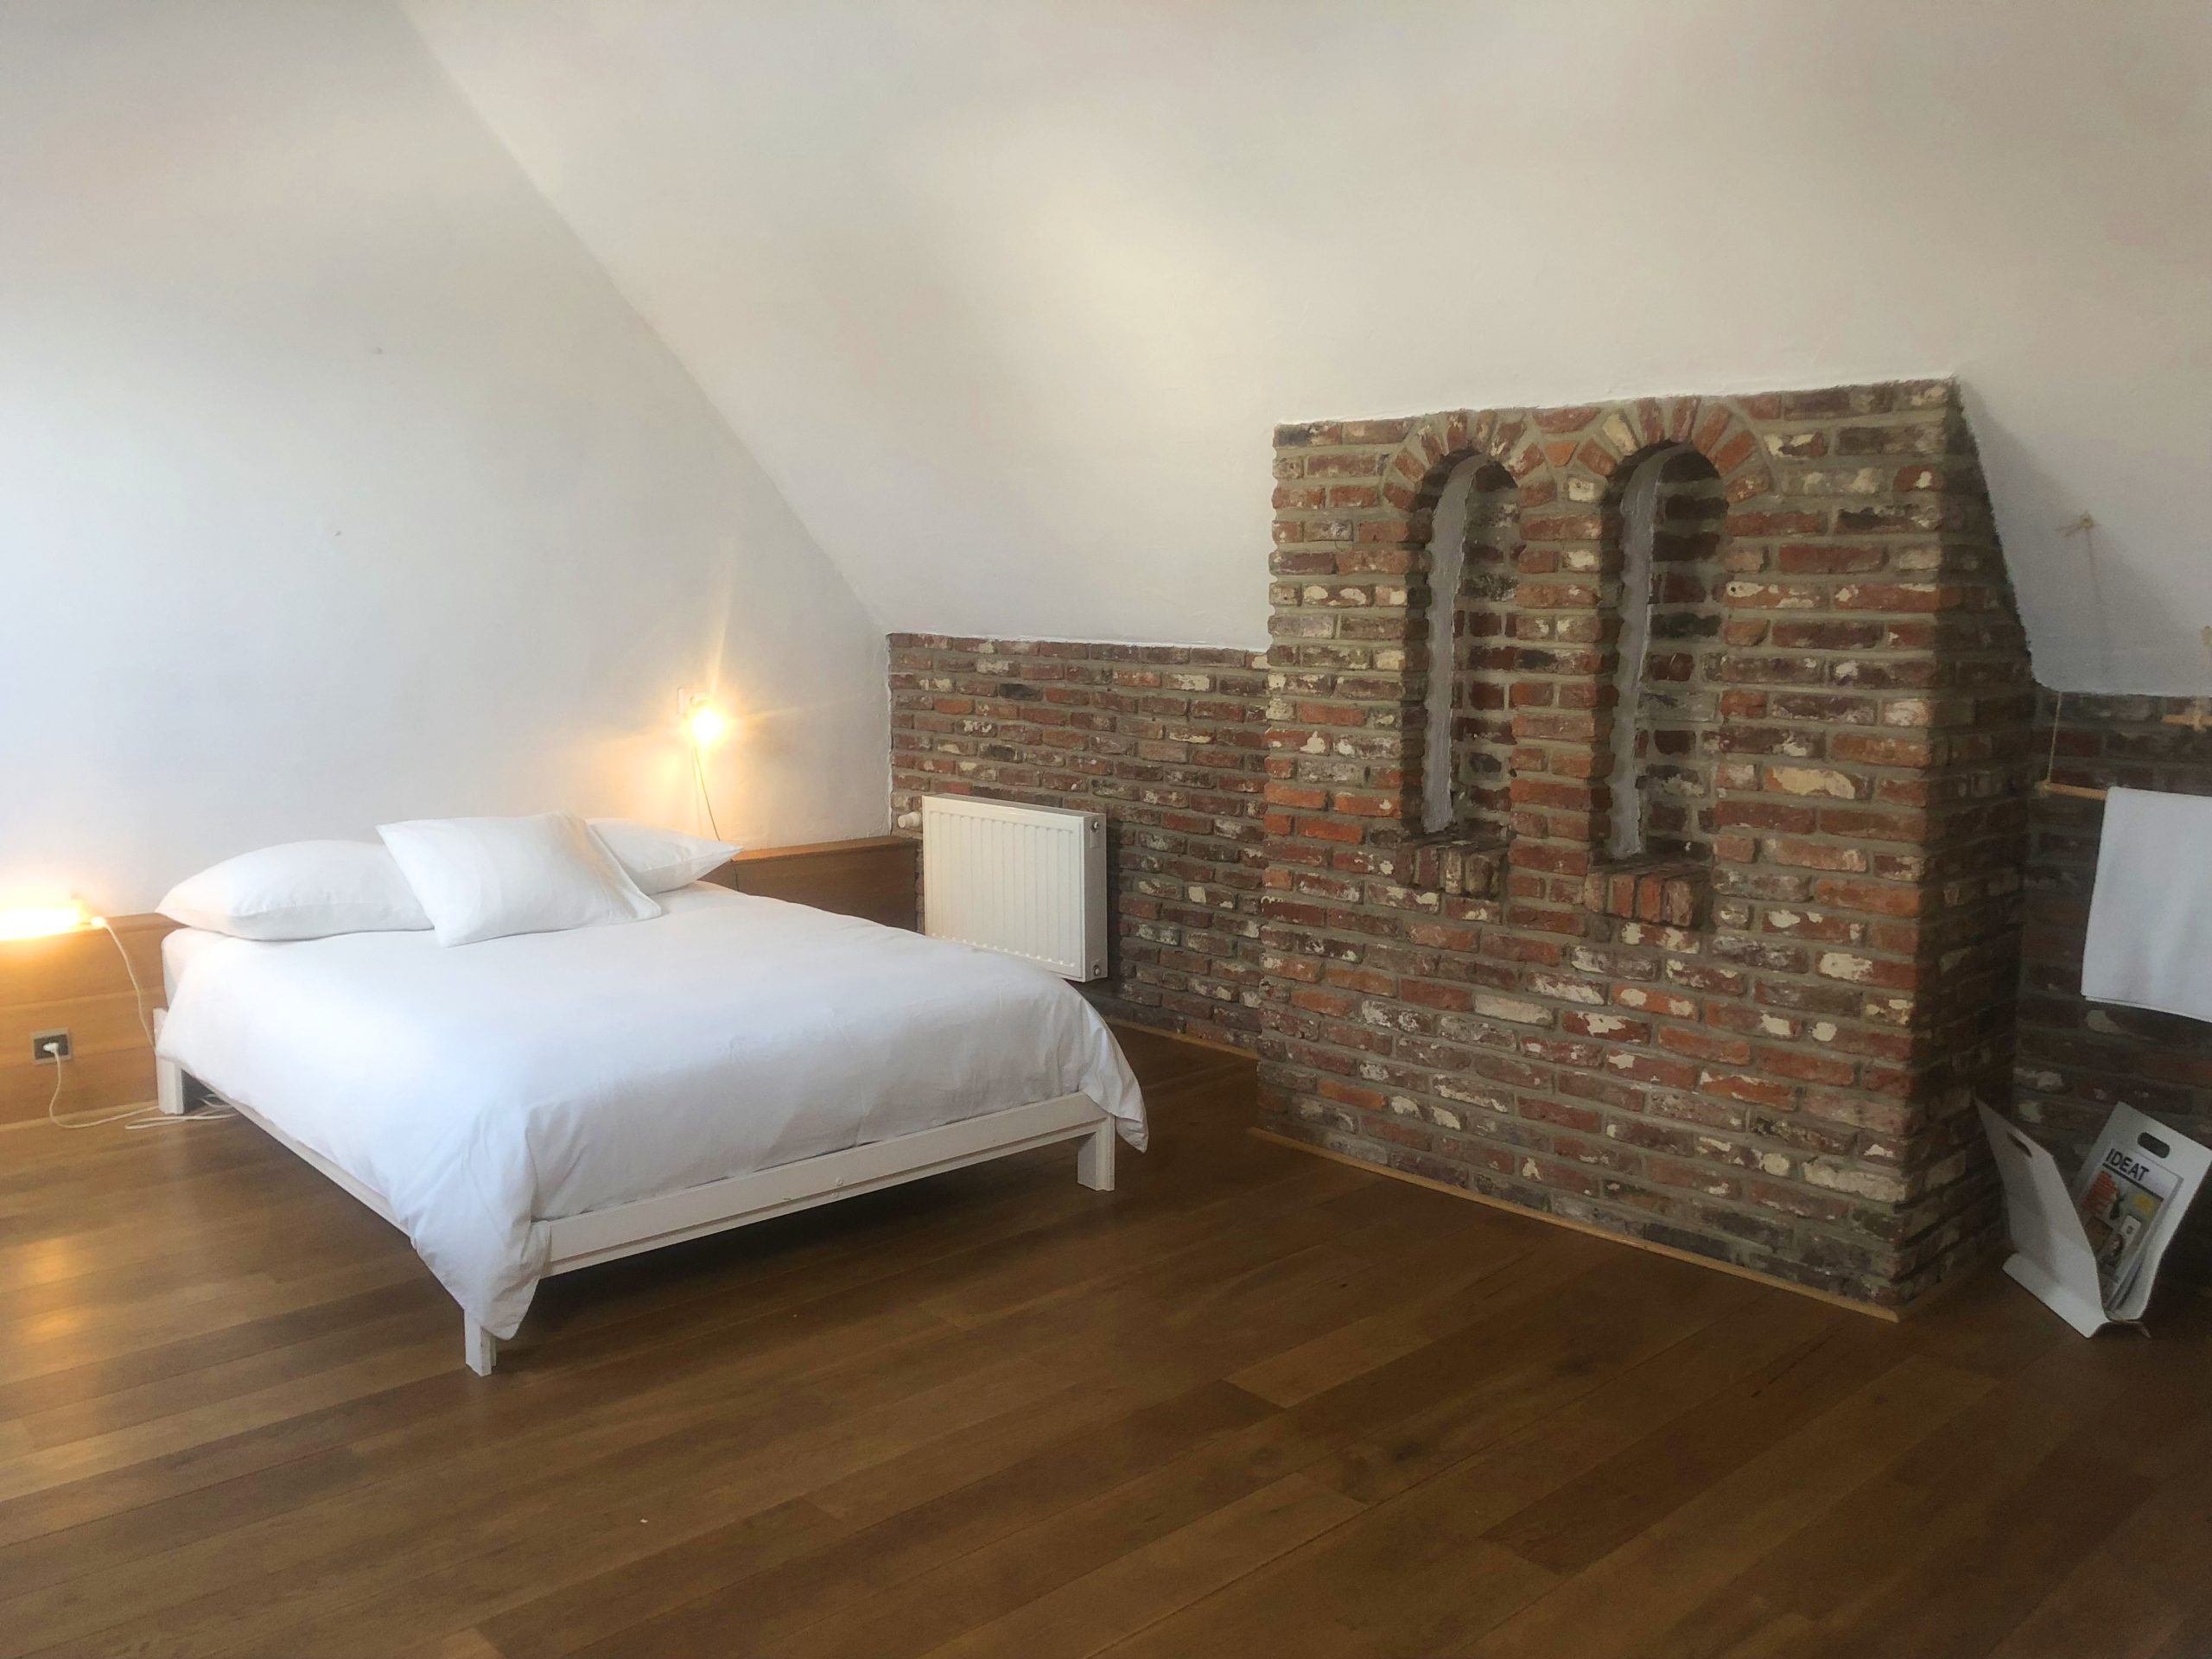 Sablon - Luxury flat for rent in Brussels